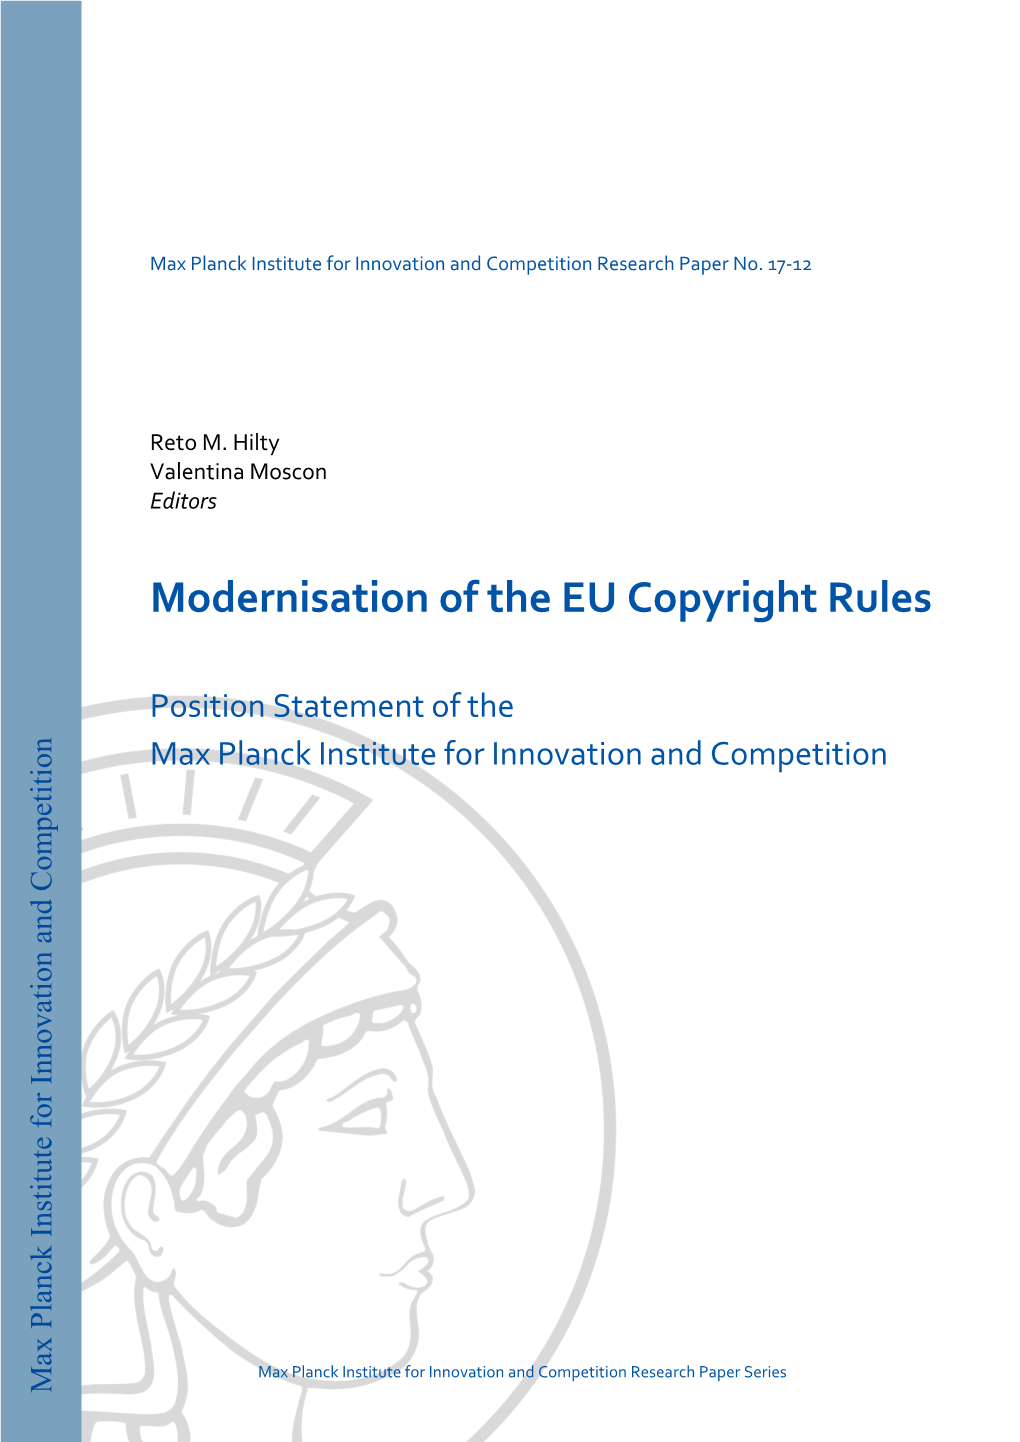 Modernisation of the EU Copyright Rules